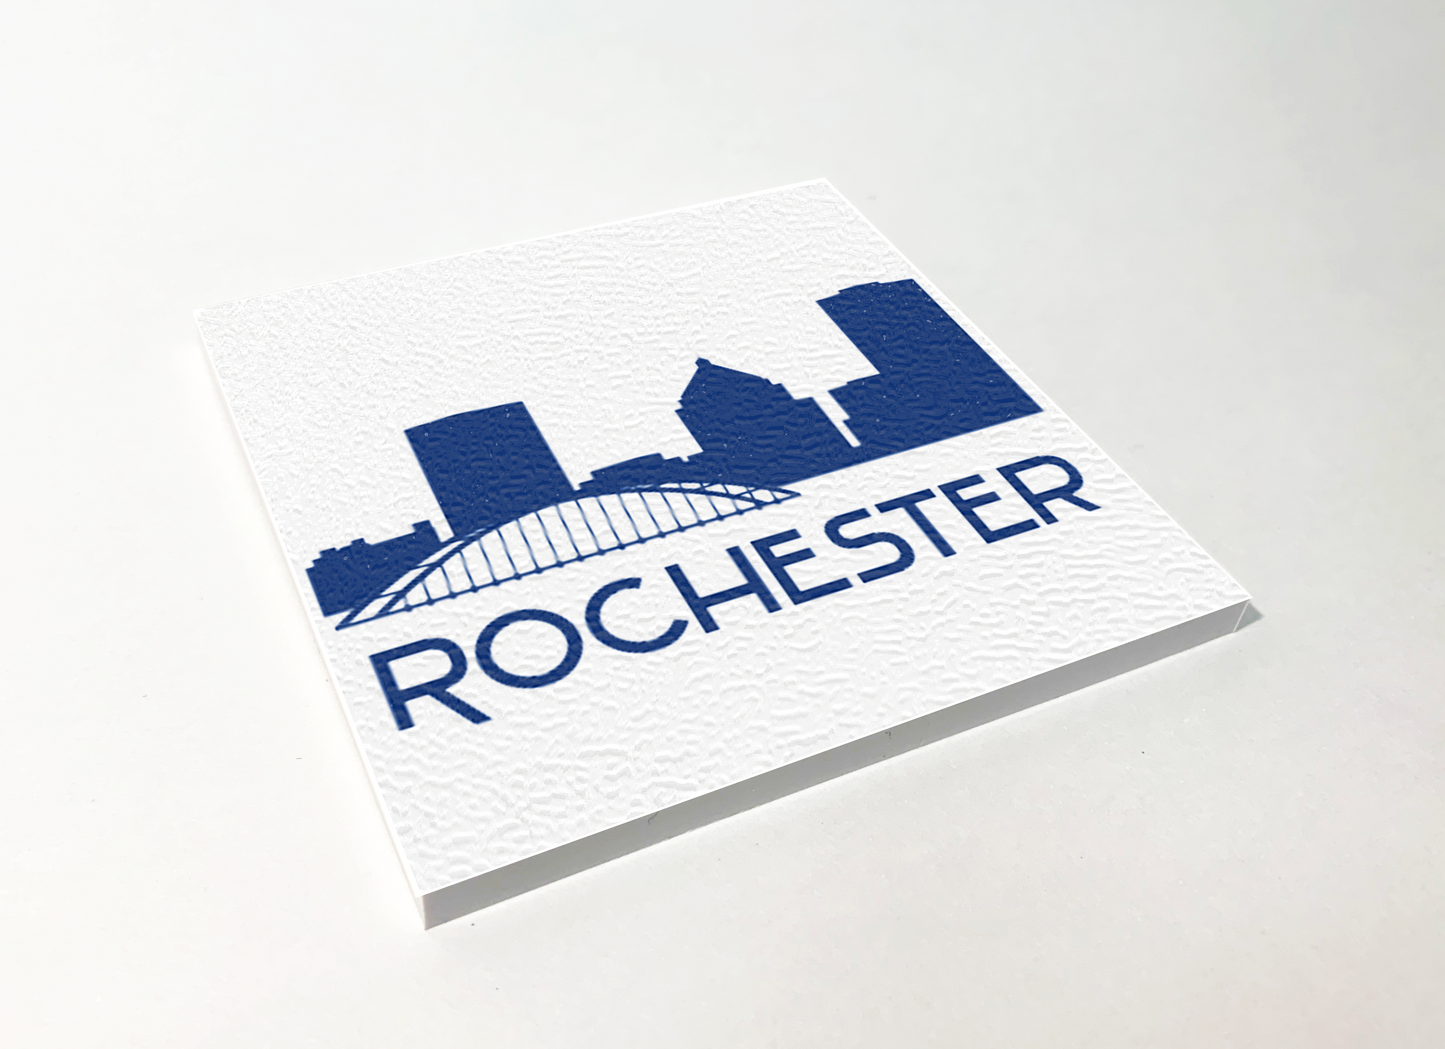 Rochester Skyline Blue ABS Plastic Coaster 4 Pack Designed and Handcrafted in Buffalo NY